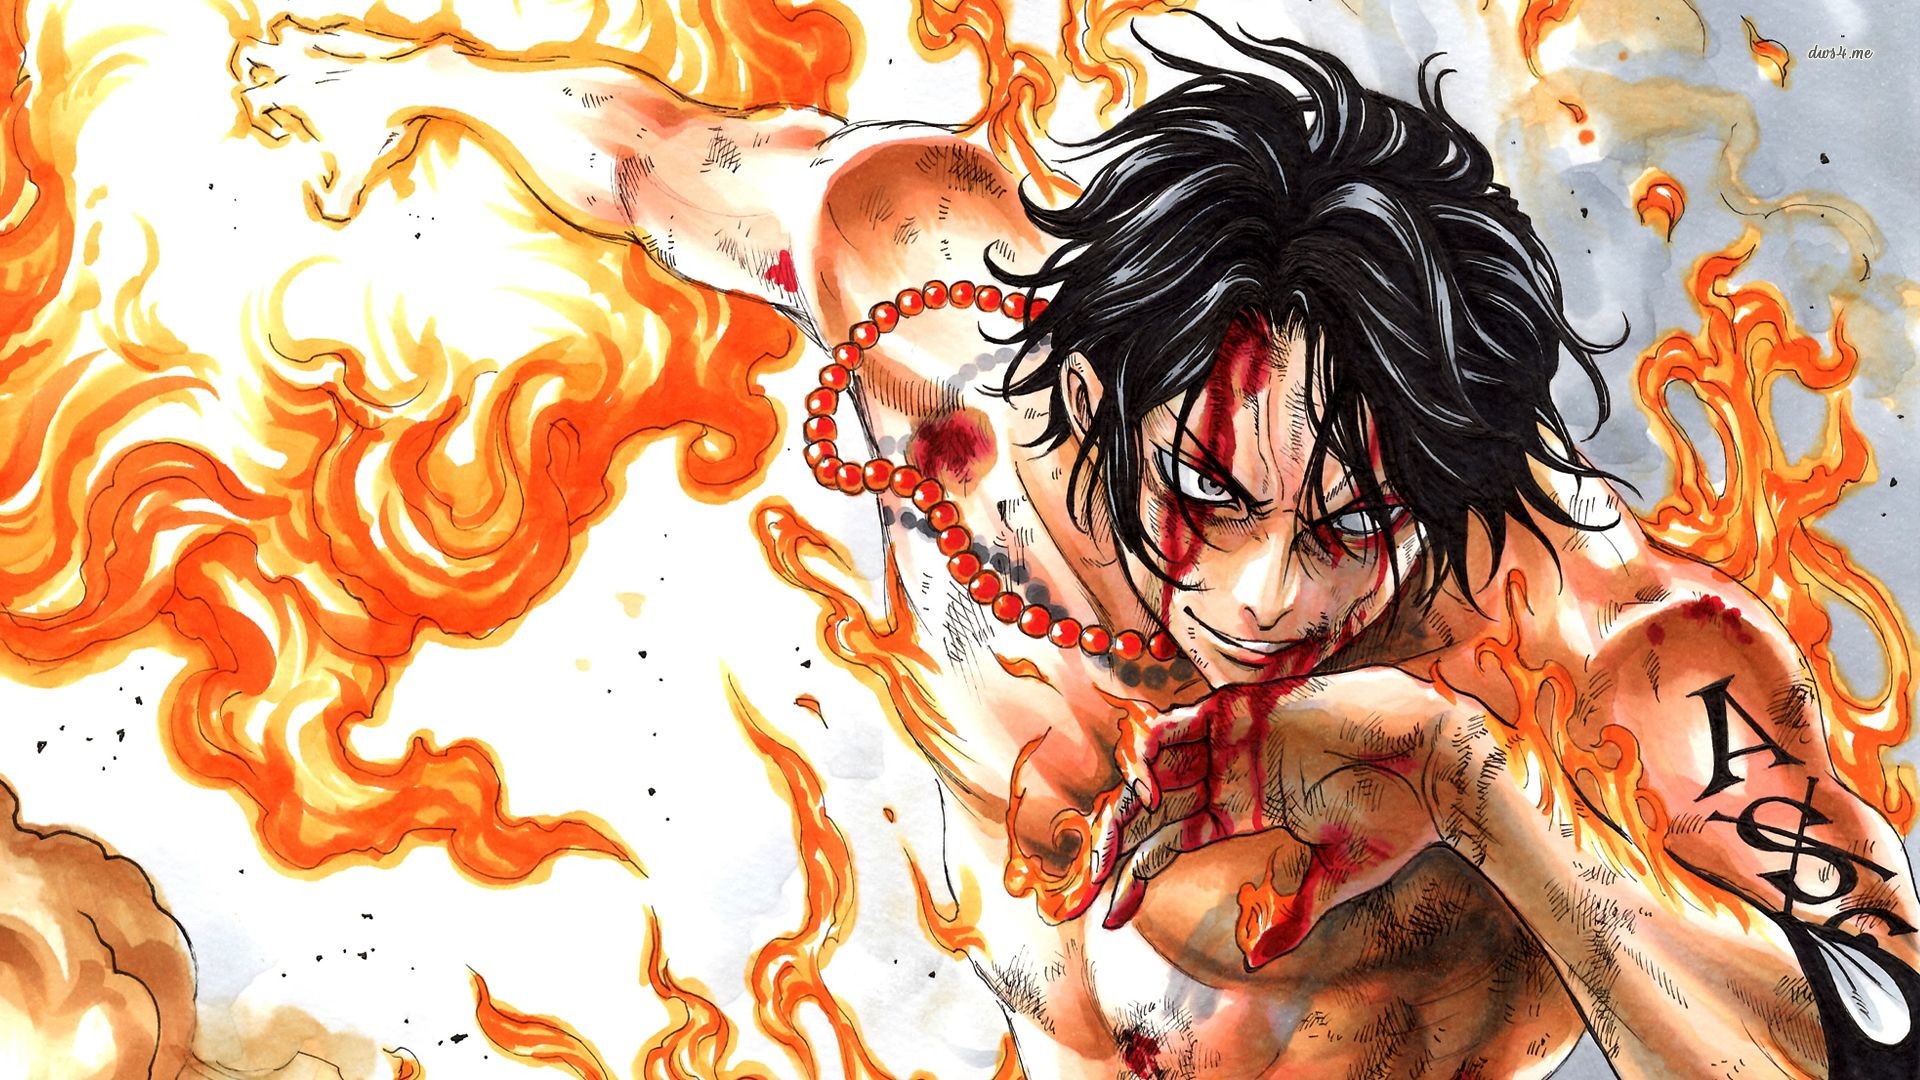 1920x1080 1000+ ideas about One Piece Wallpaper  on Pinterest | anime One  Piece, Imagenes de luffy and One piece supernovas